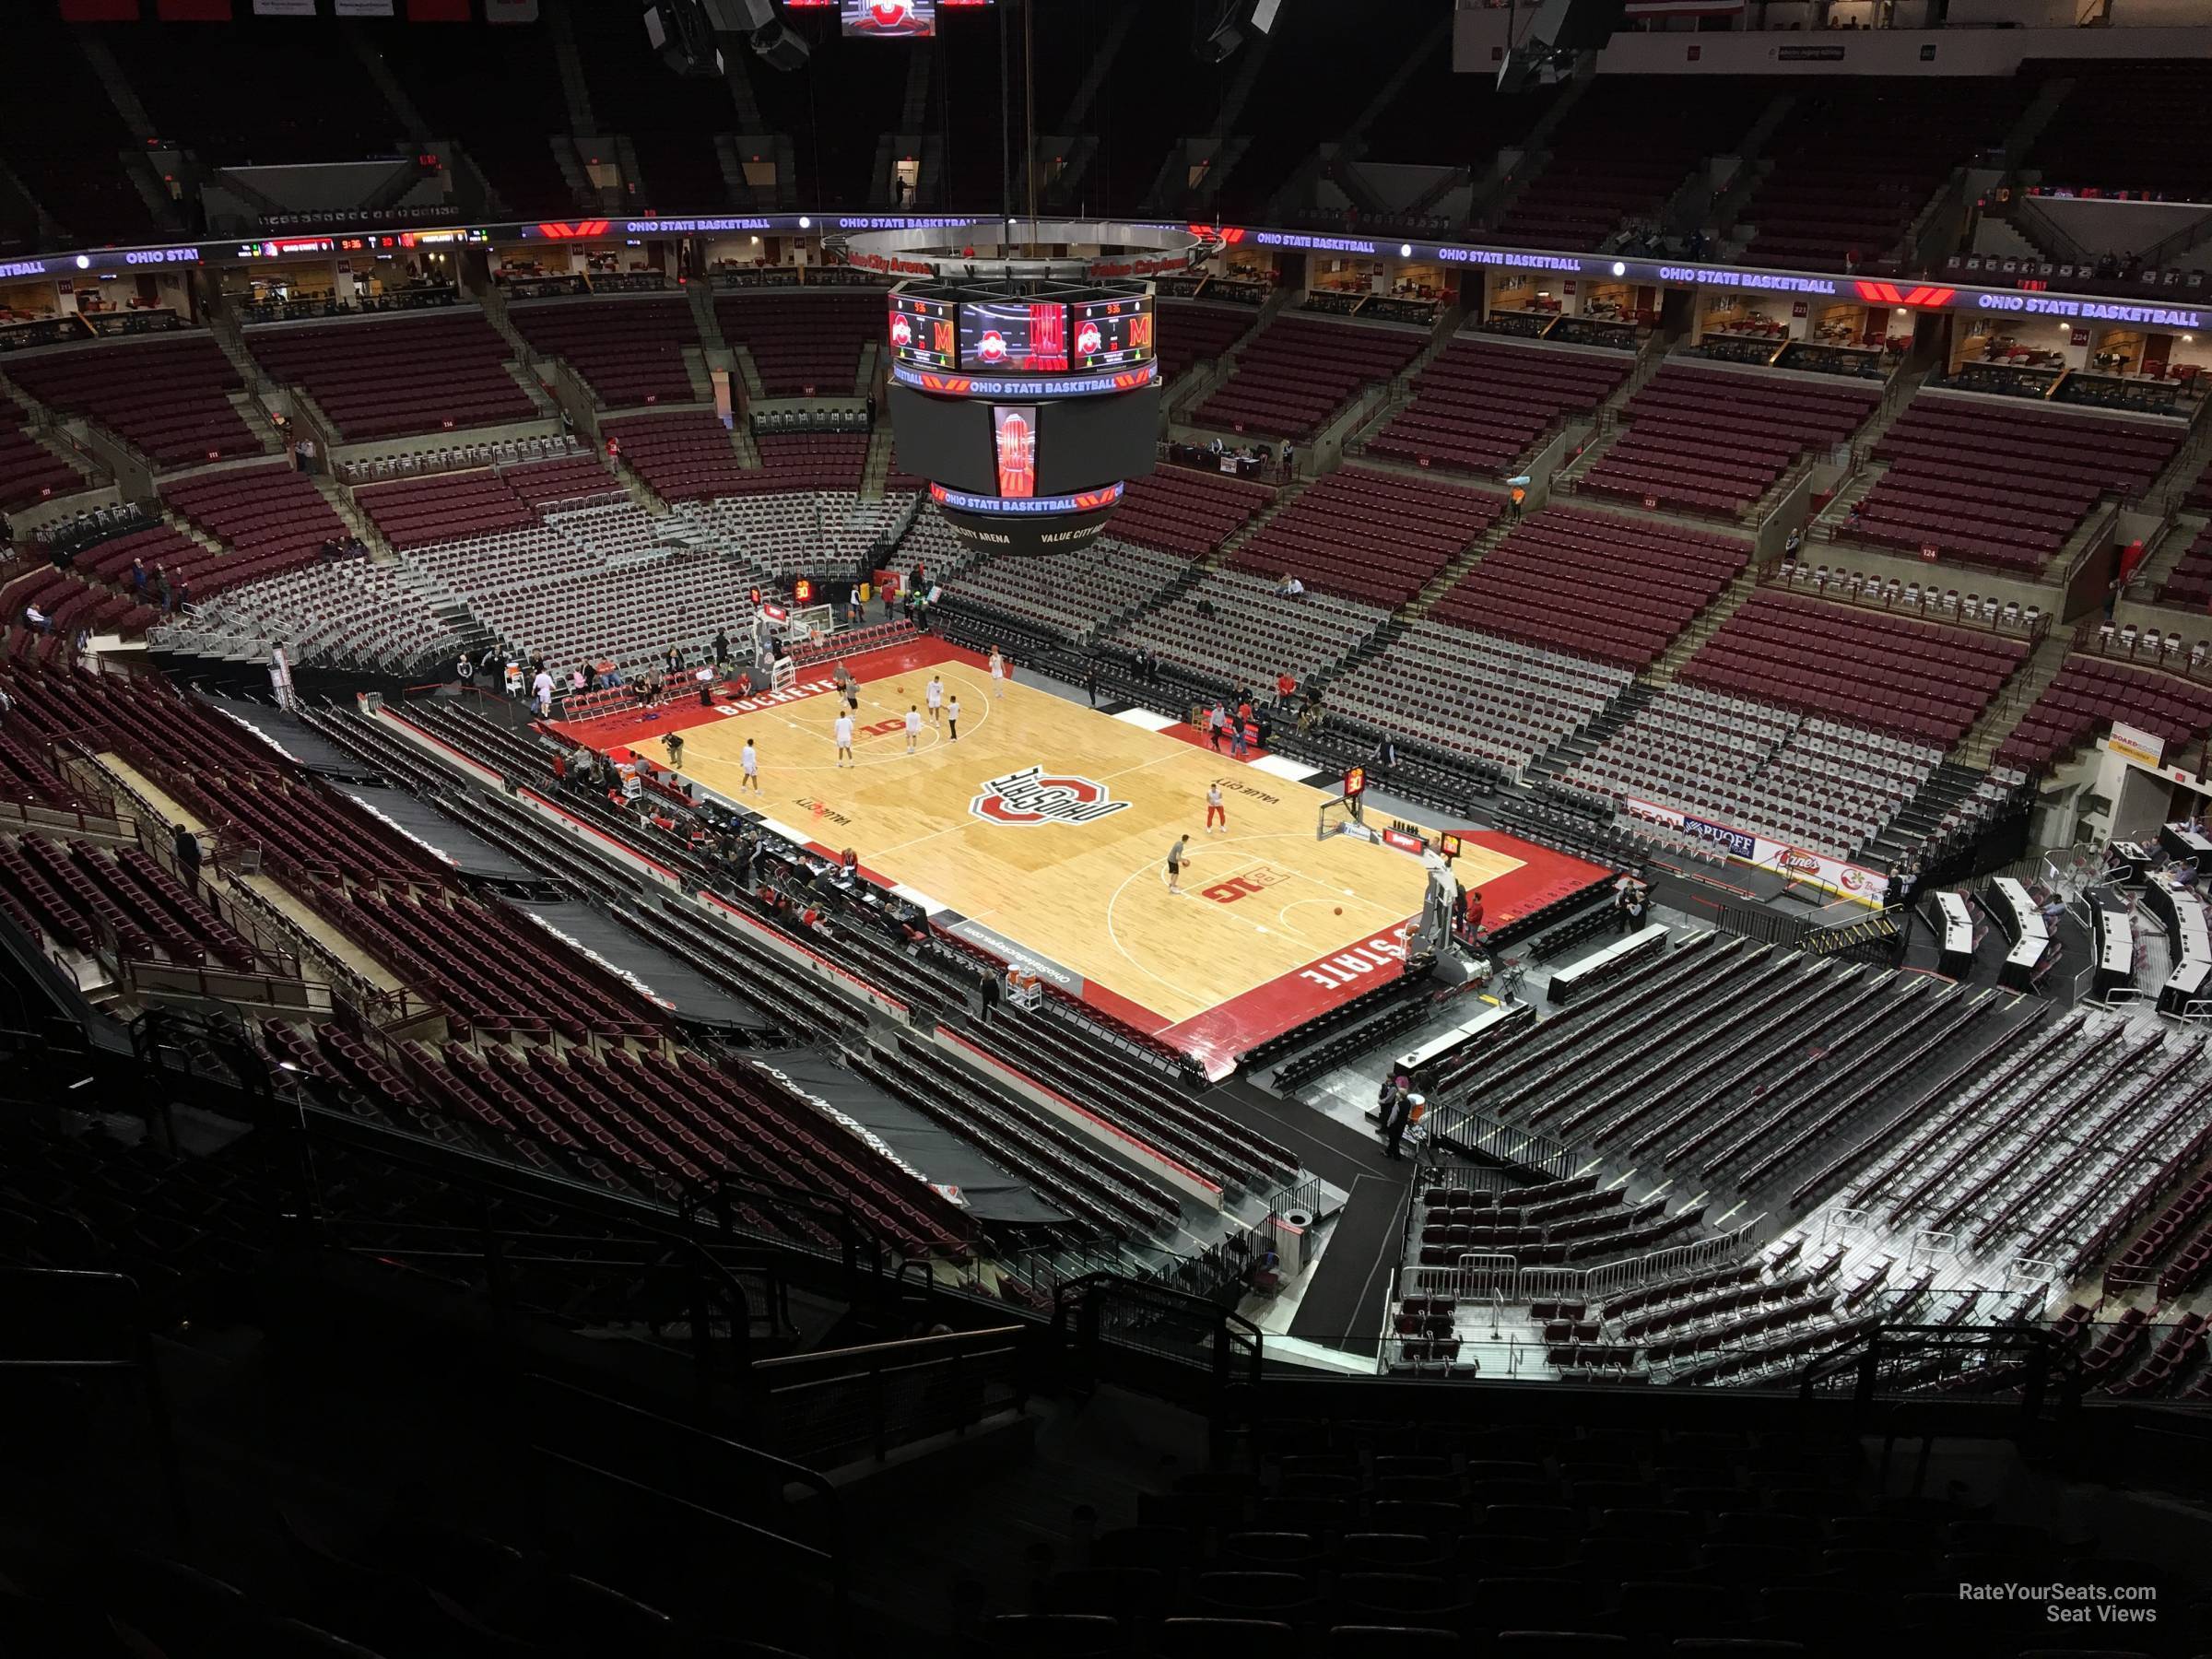 section 301, row m seat view  for basketball - schottenstein center